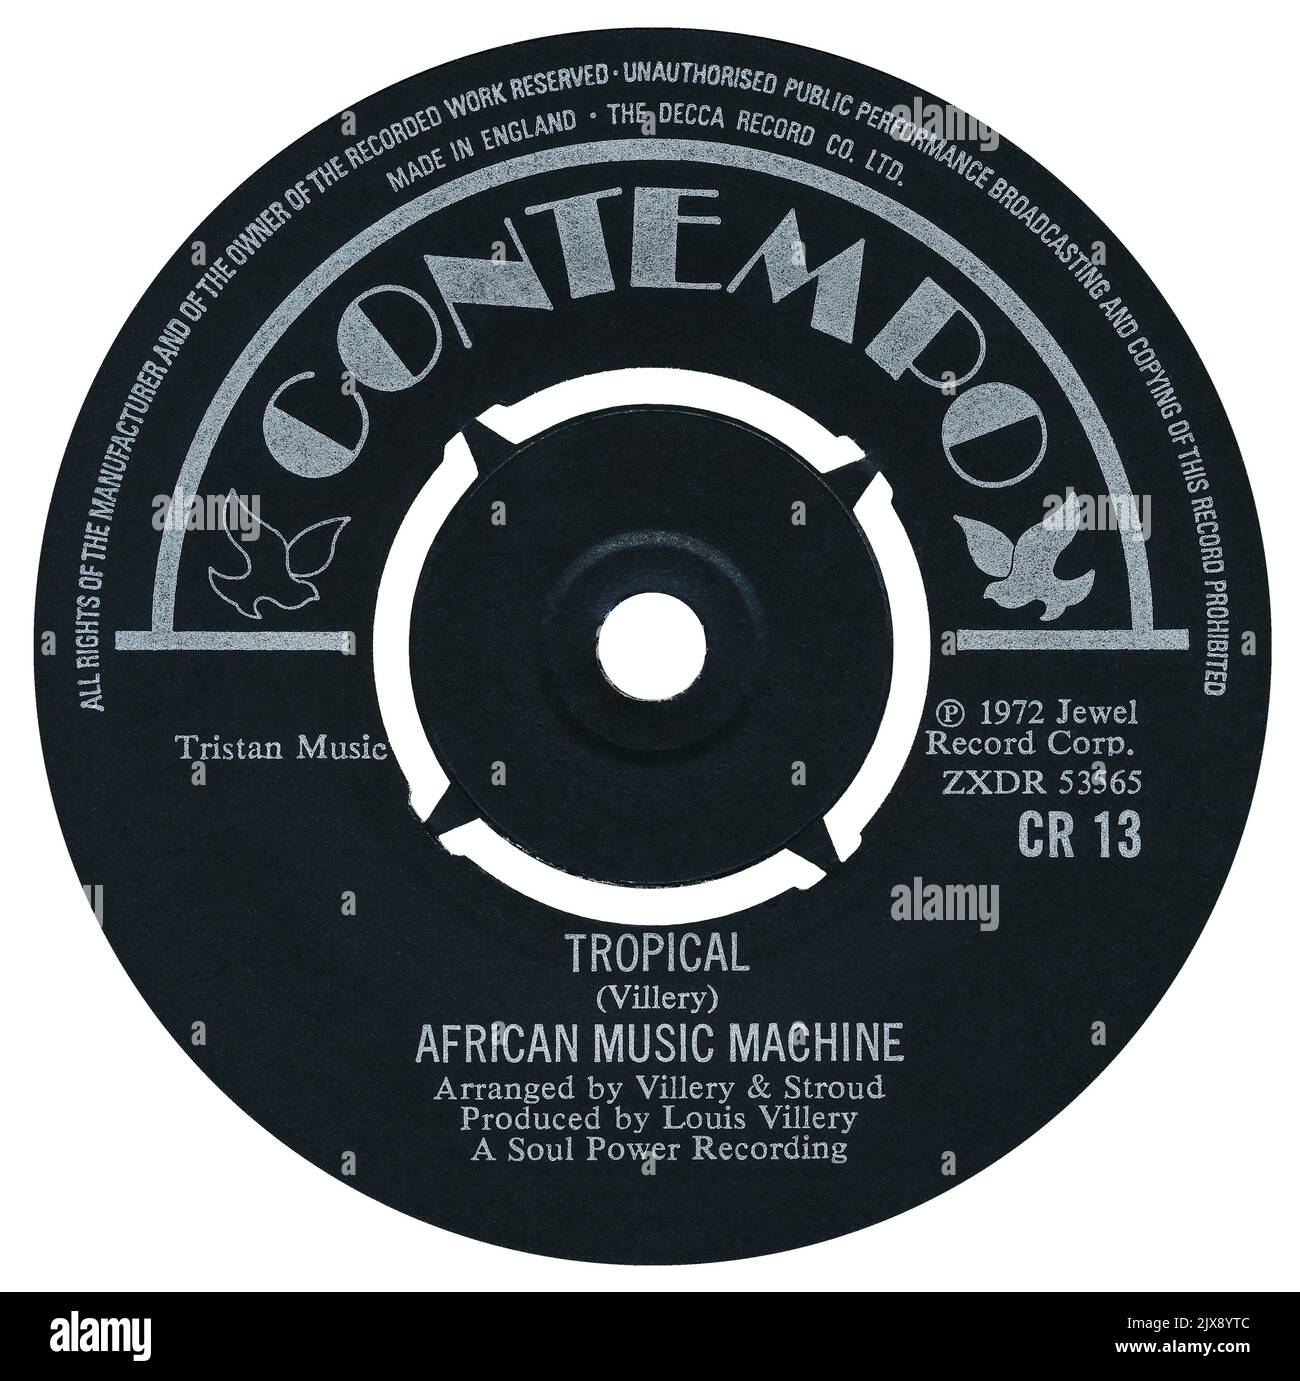 45 RPM 7' UK record label of Tropical by African Music Machine. Written and produced by Louis Villery. Released on the Contempo label in June 1973. Stock Photo